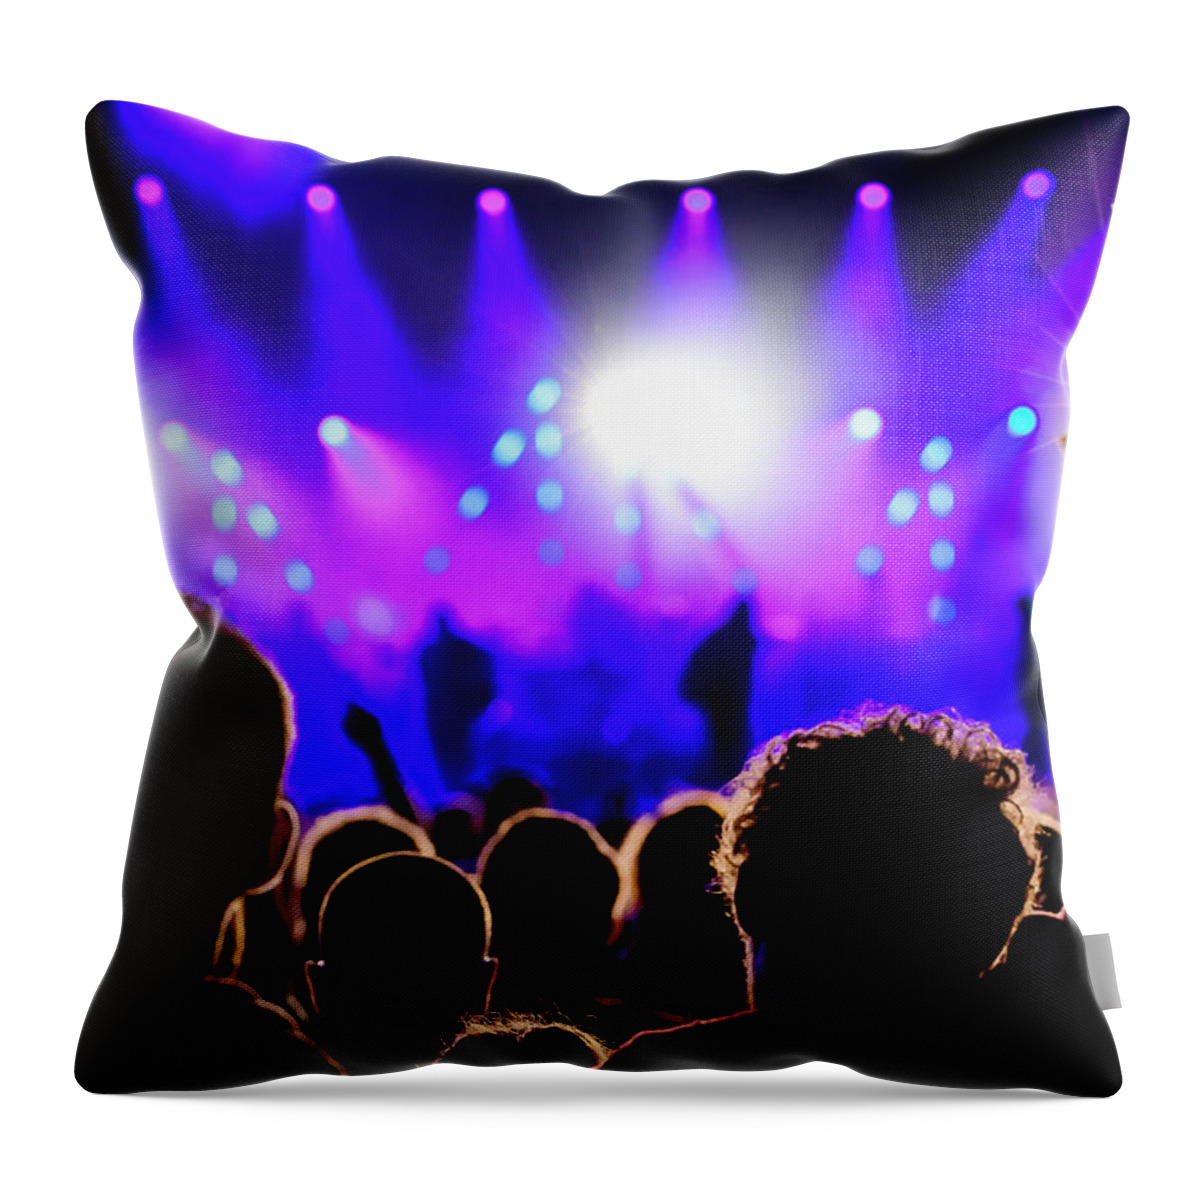 Entertainment Event Throw Pillow featuring the photograph People Partying by Marin Tomas